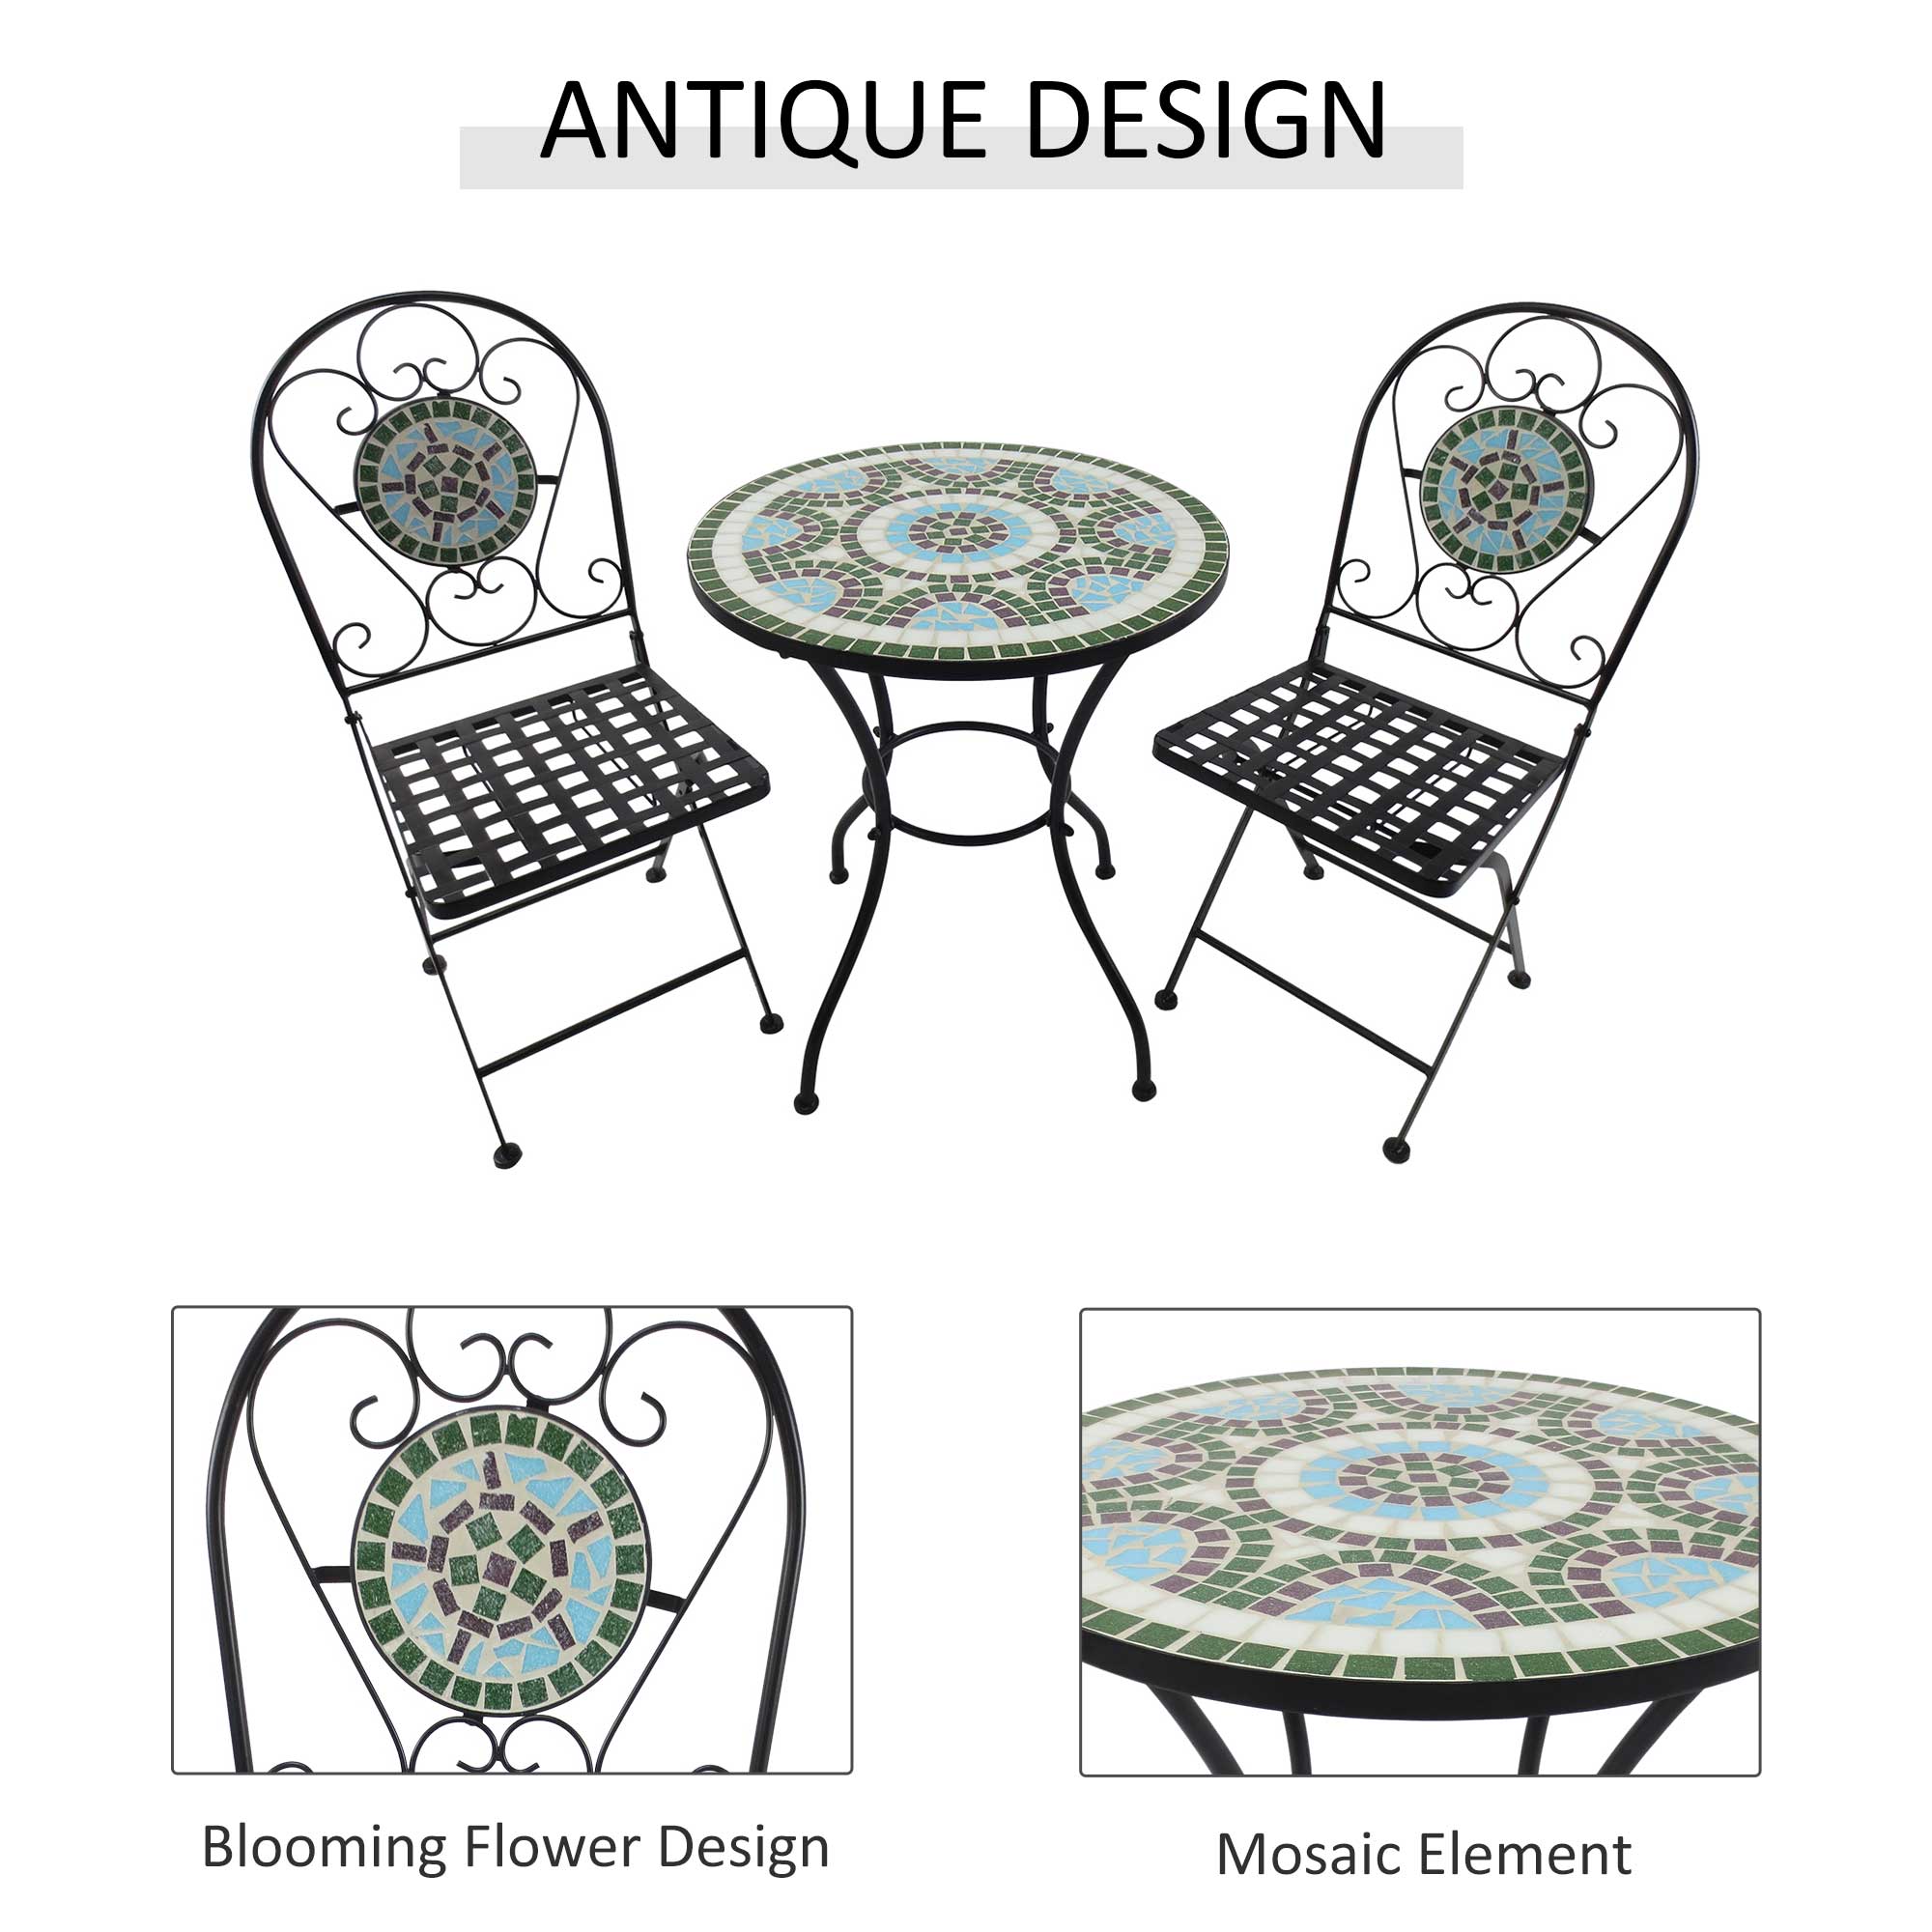 Outsunny 3pc Bistro Set Metal Dining Set Mosaic Garden Table 2 Seater Folding Chairs Patio Furniture Outdoor